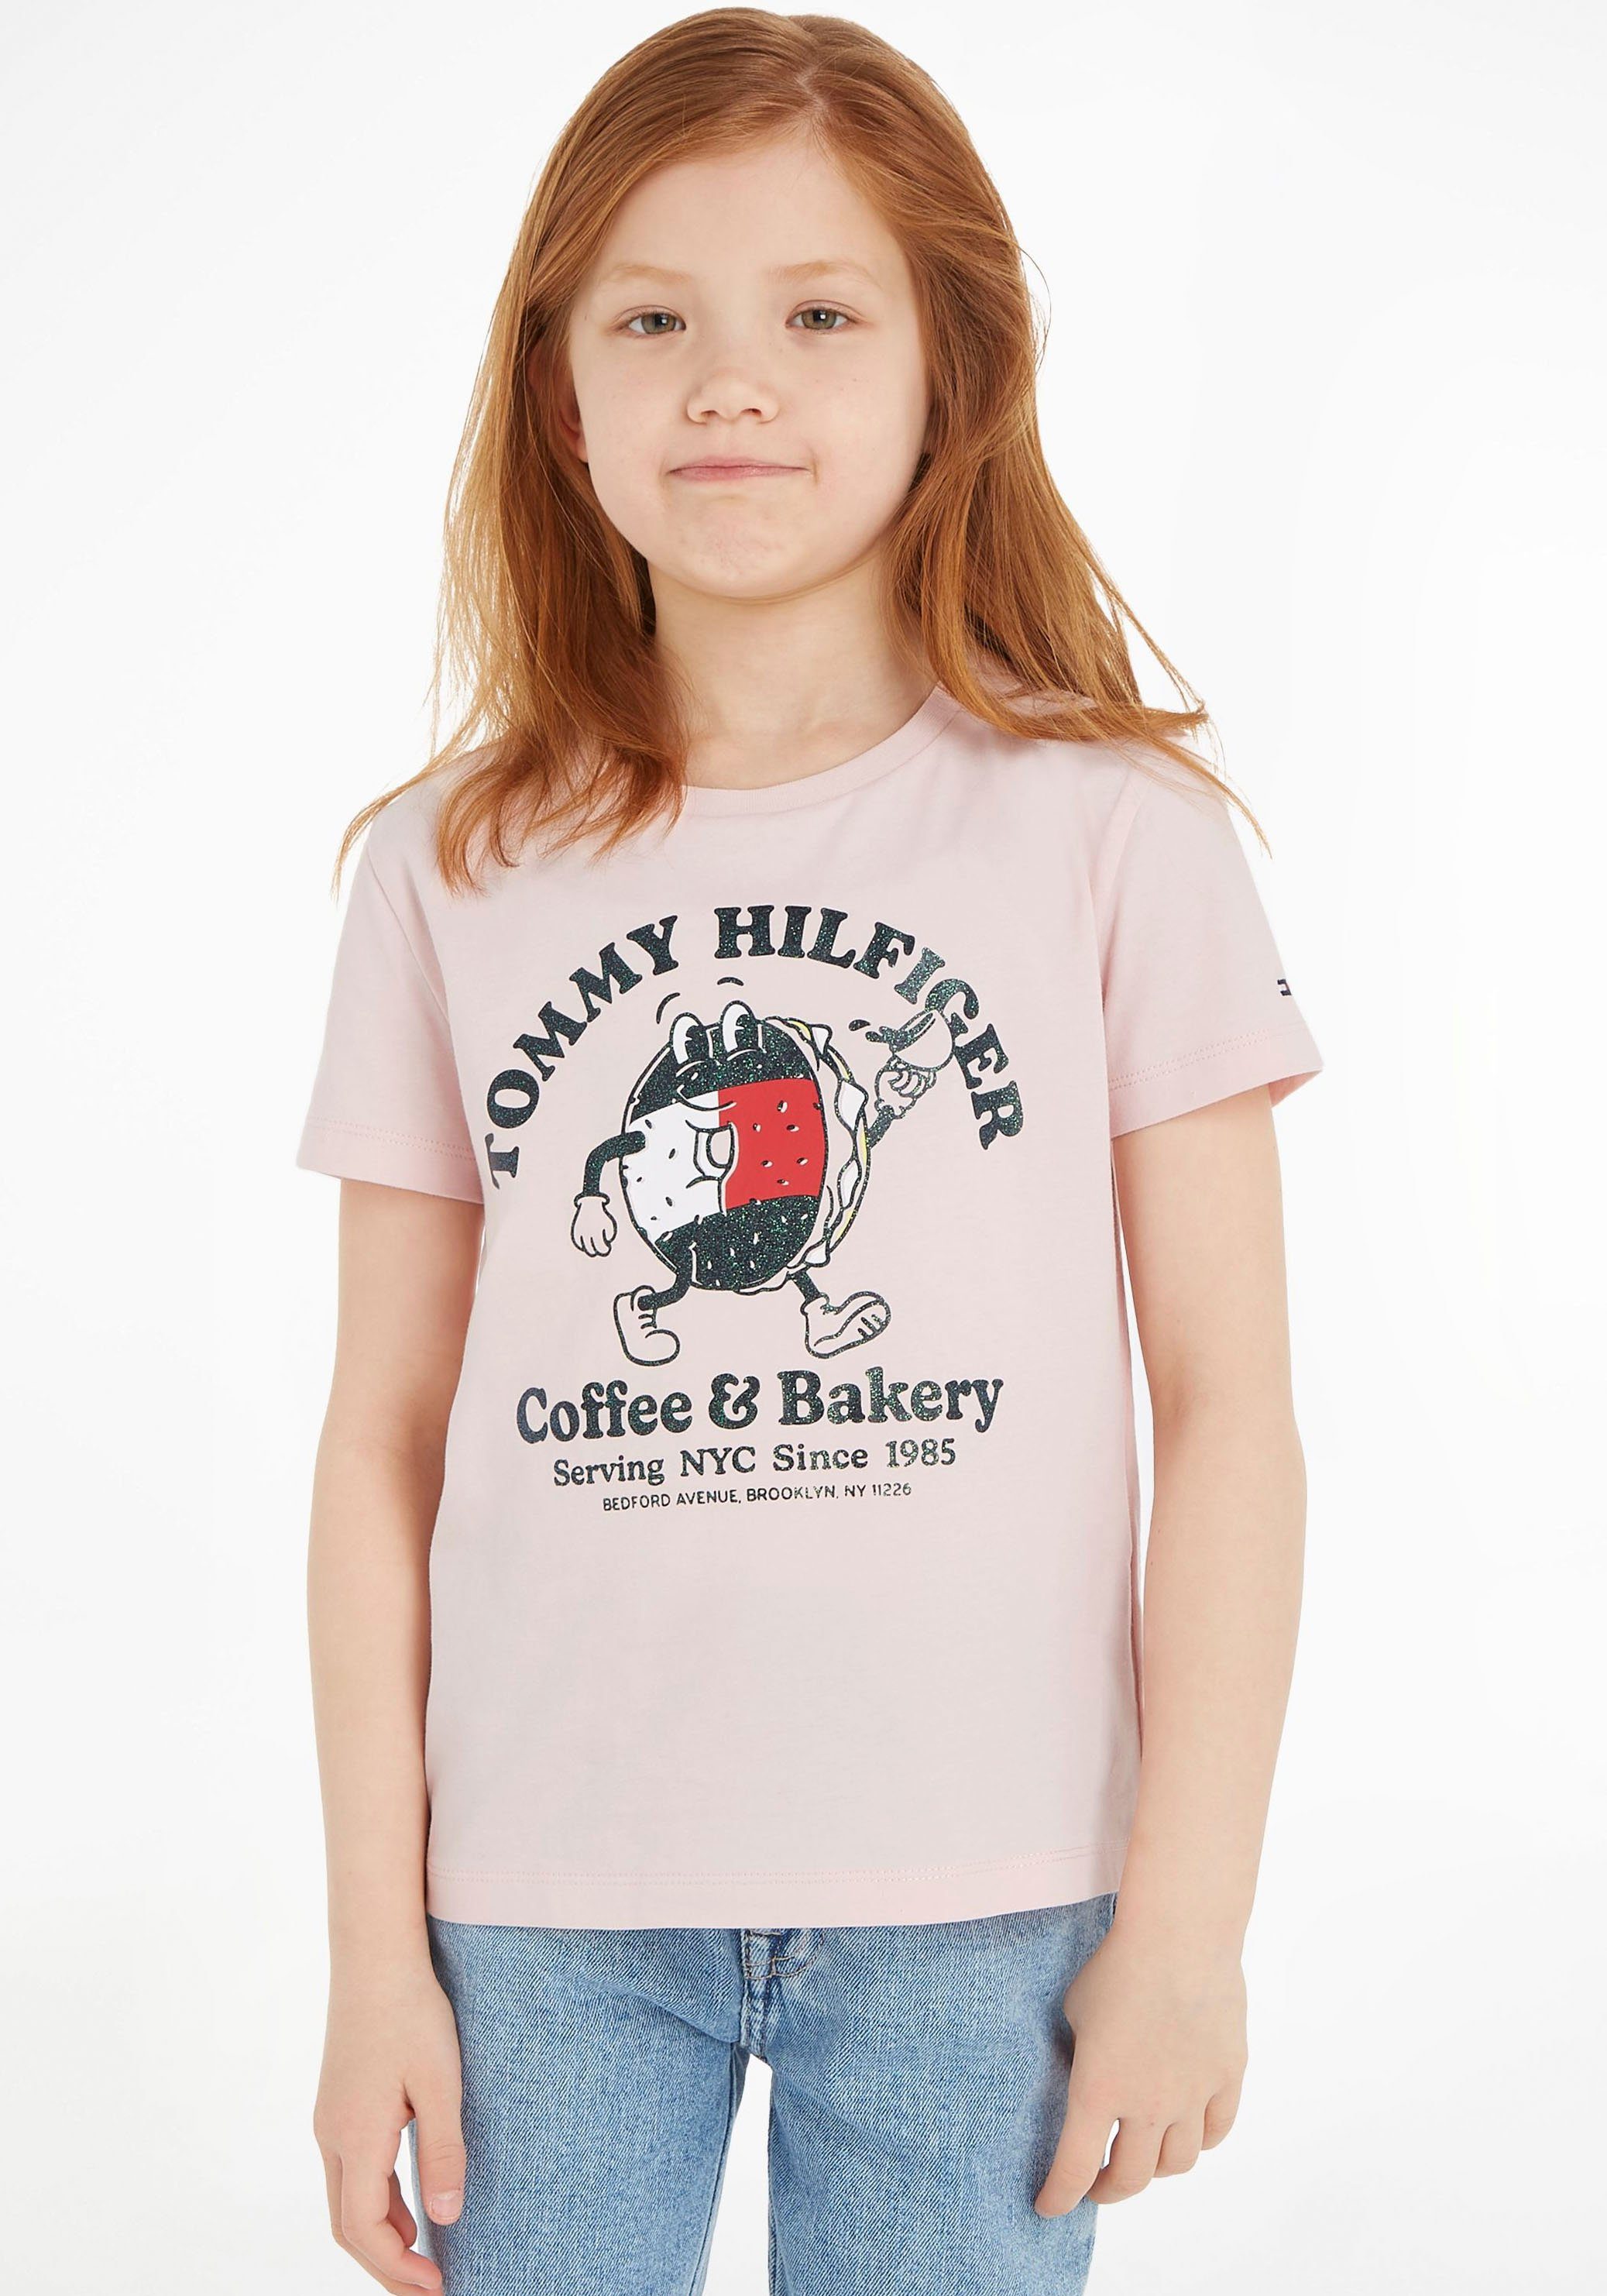 Tommy Hilfiger T-shirt TOMMY BAGELS TEE S S